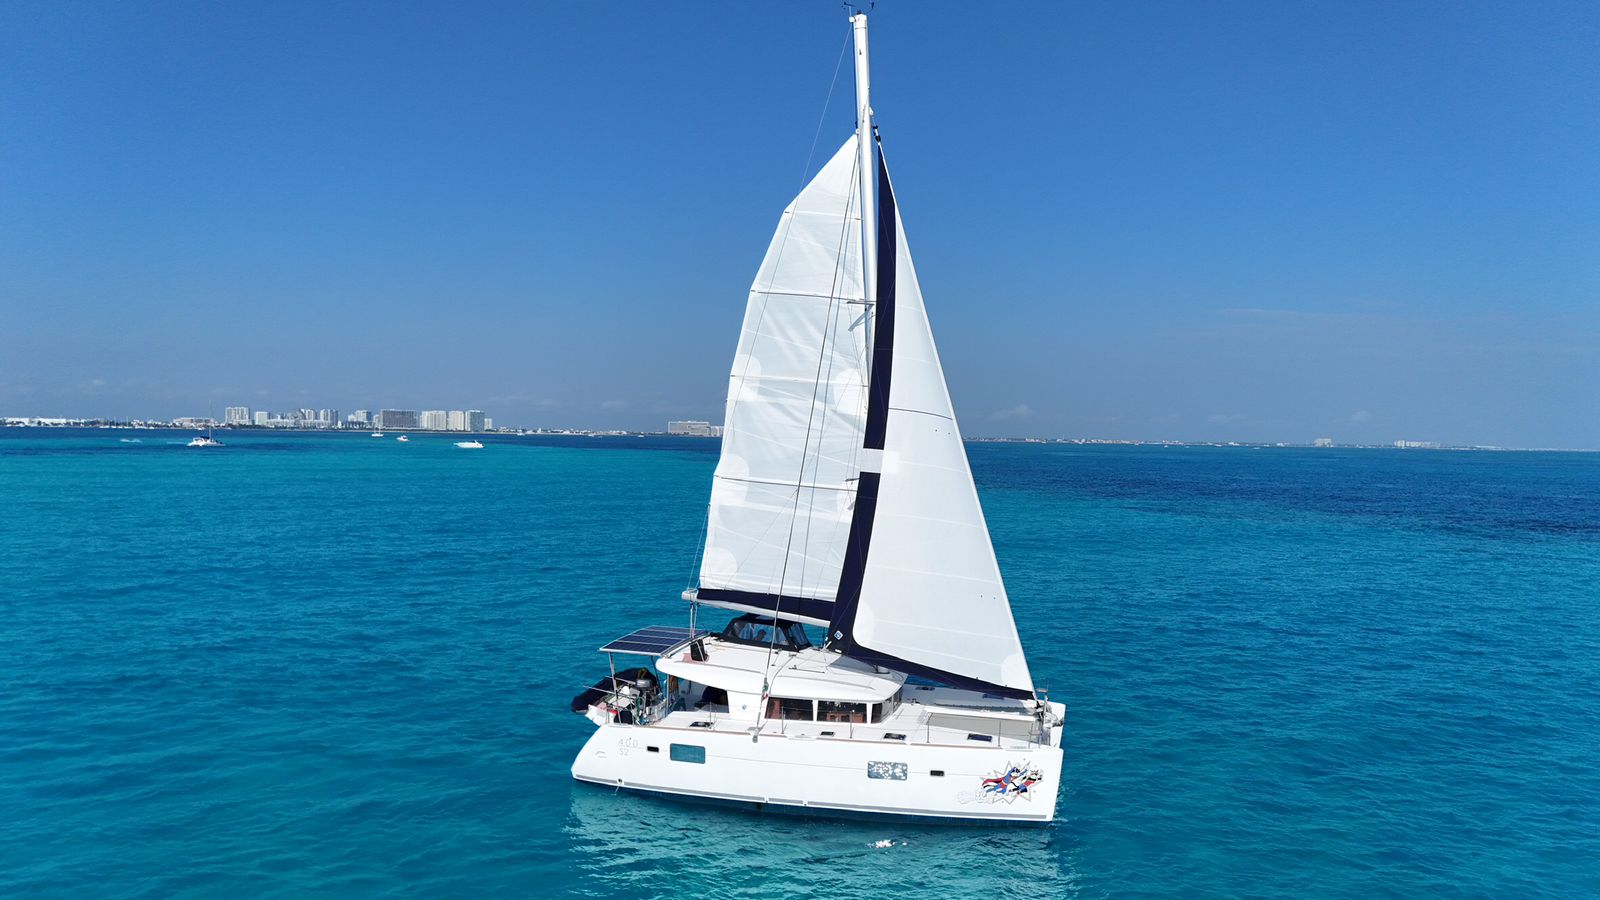 Ready to explore Isla Mujeres with a Catamaran in Cancun?